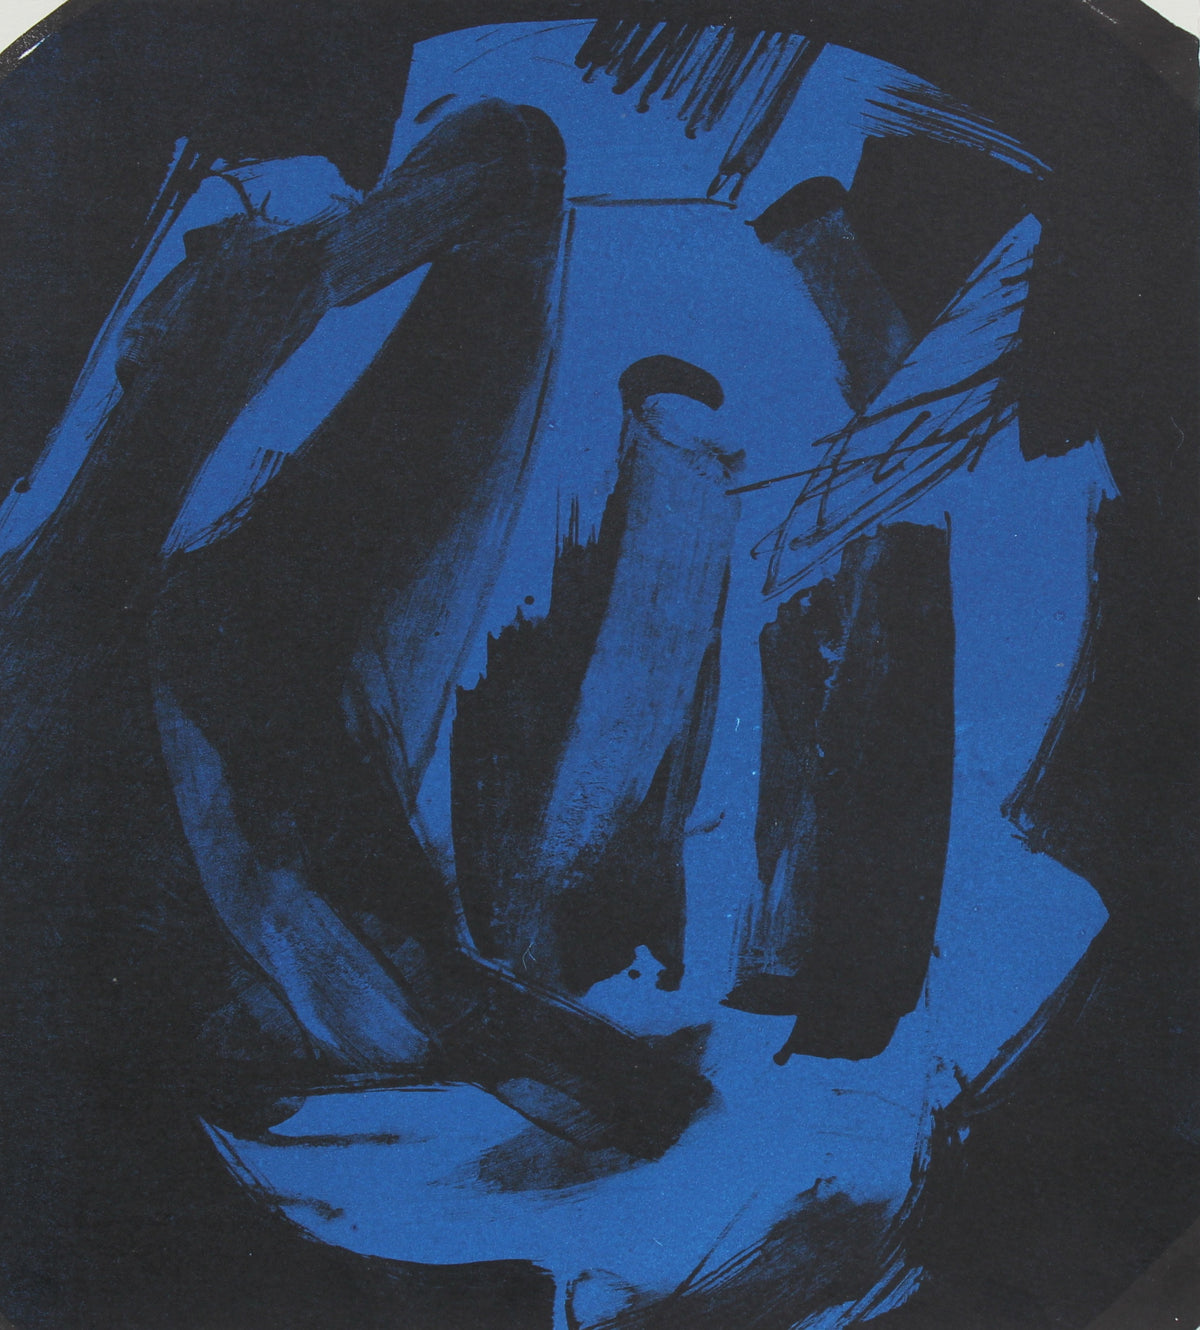 Abstract Print in Blue and Black&lt;br&gt;1997 Lithograph &lt;br&gt;&lt;br&gt;#96831